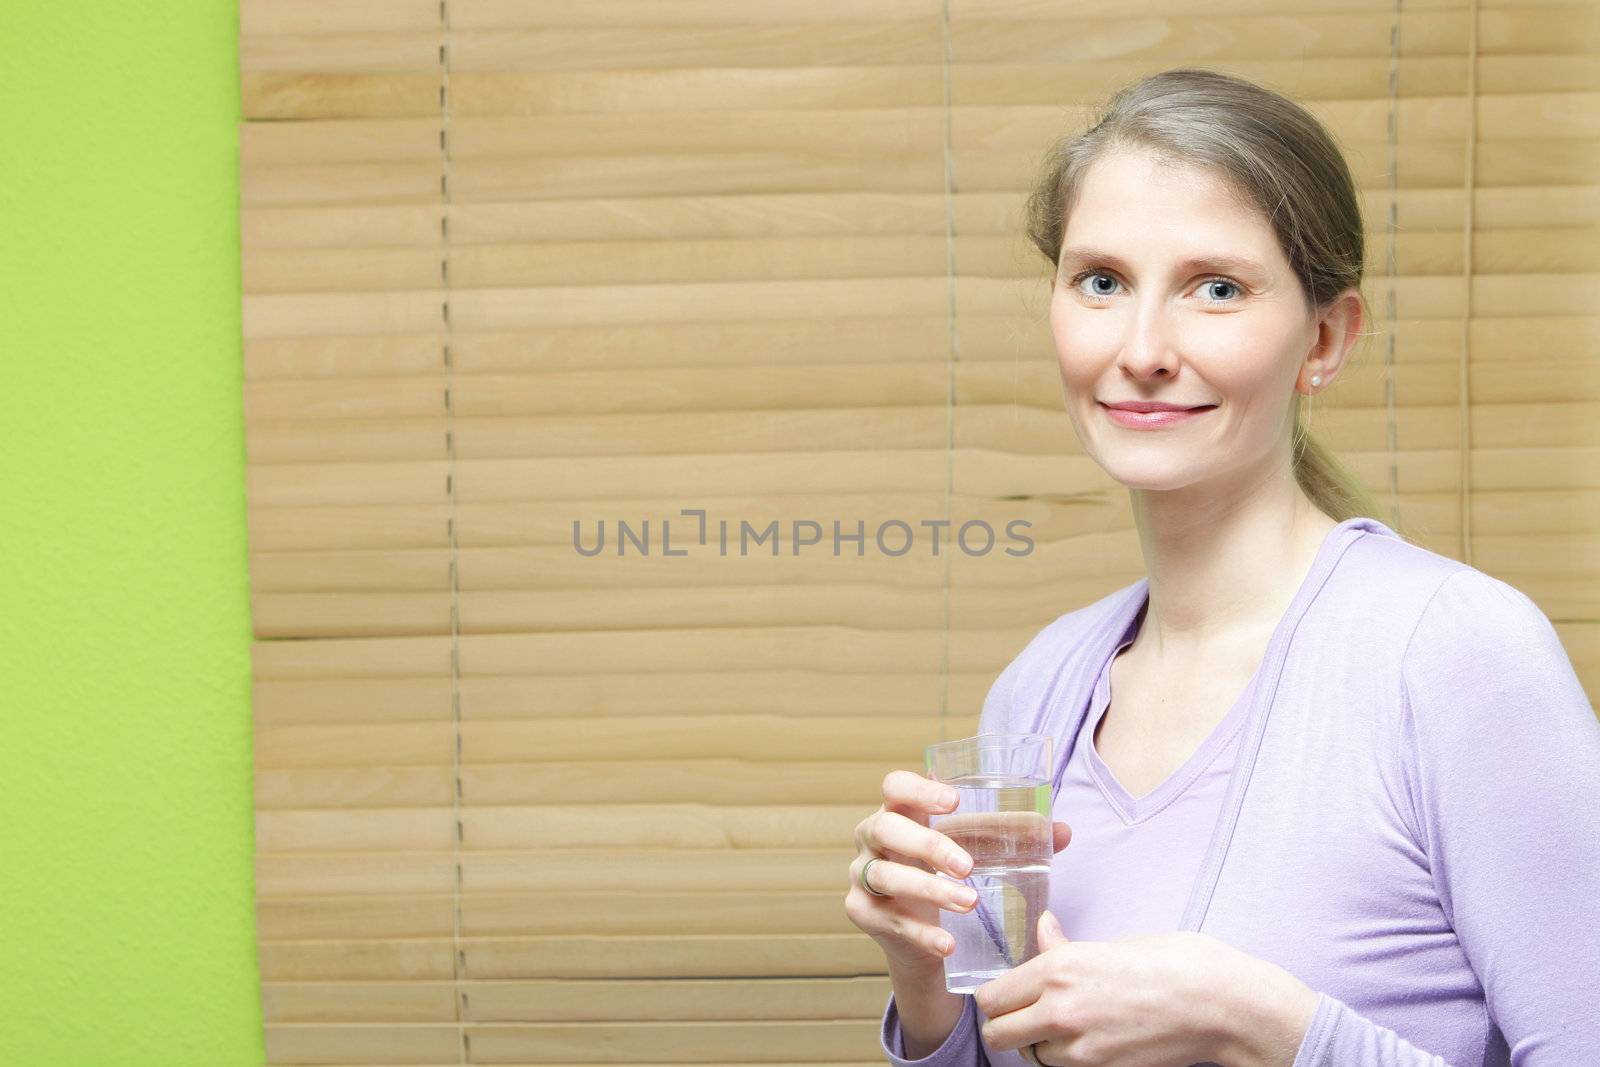 A young attractive woman holding a glass by Farina6000